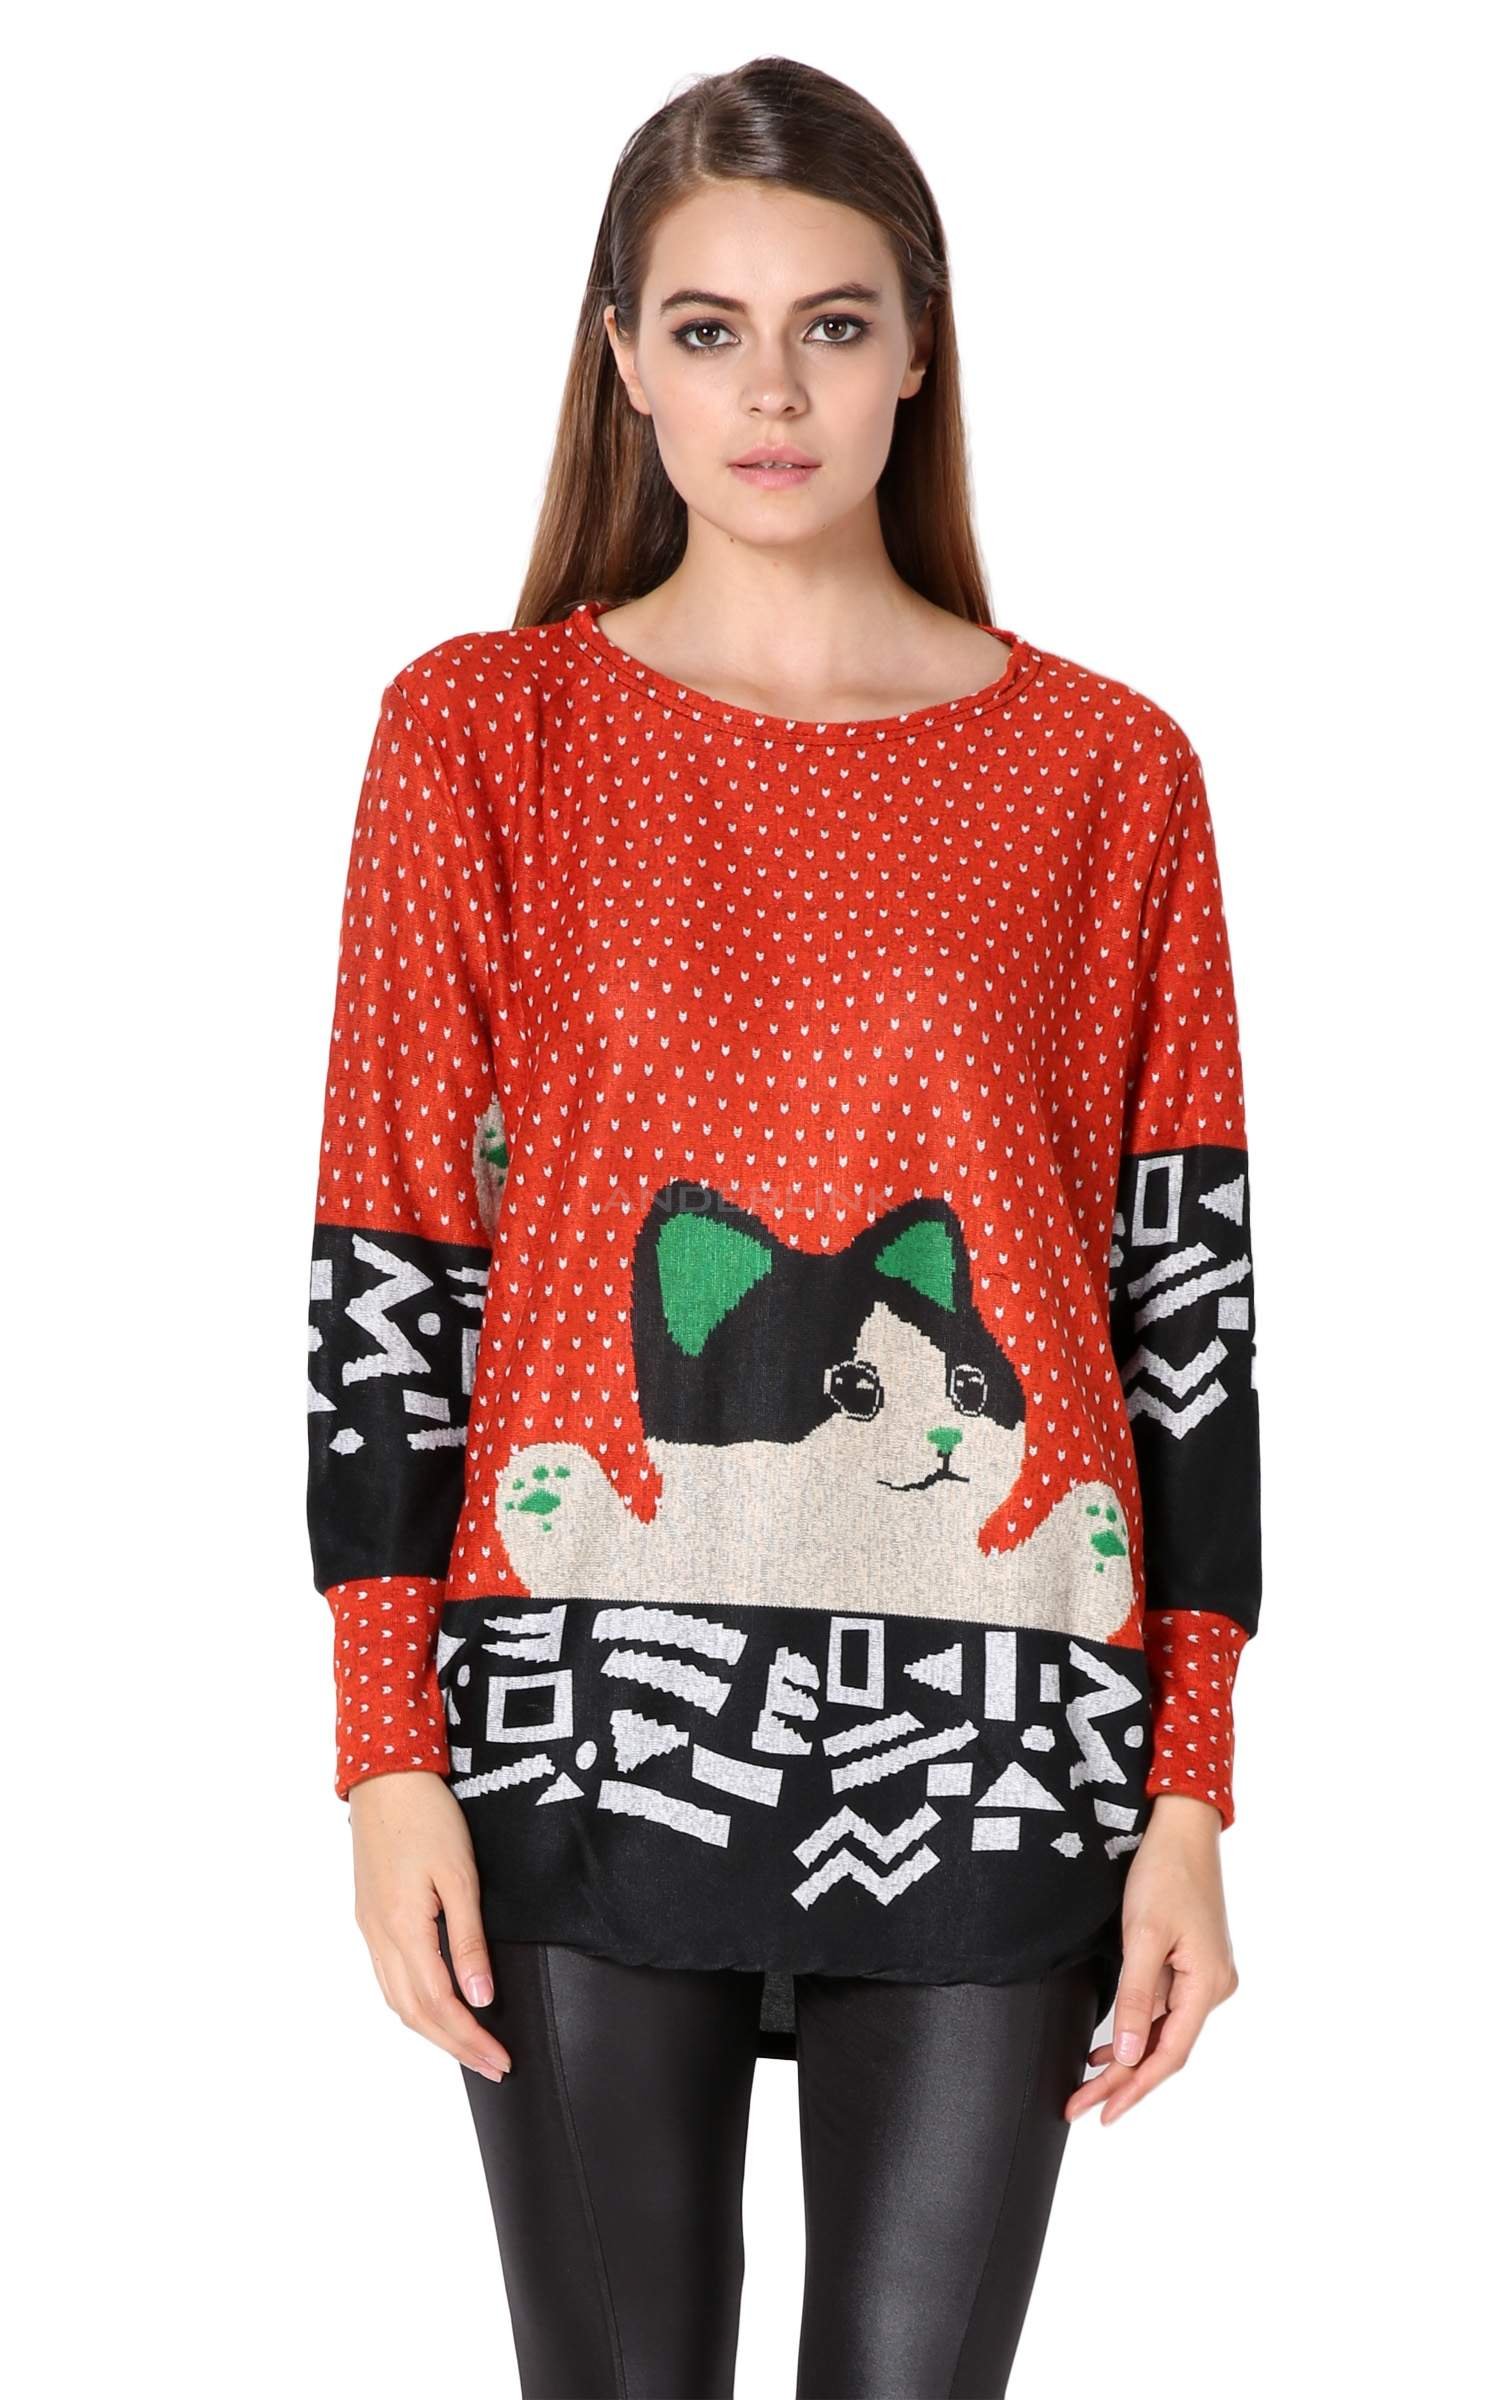 unknown New Stylish Lady Women's Long Sleeve Cartoon Print Loose Shirt Casual Blouse Tops